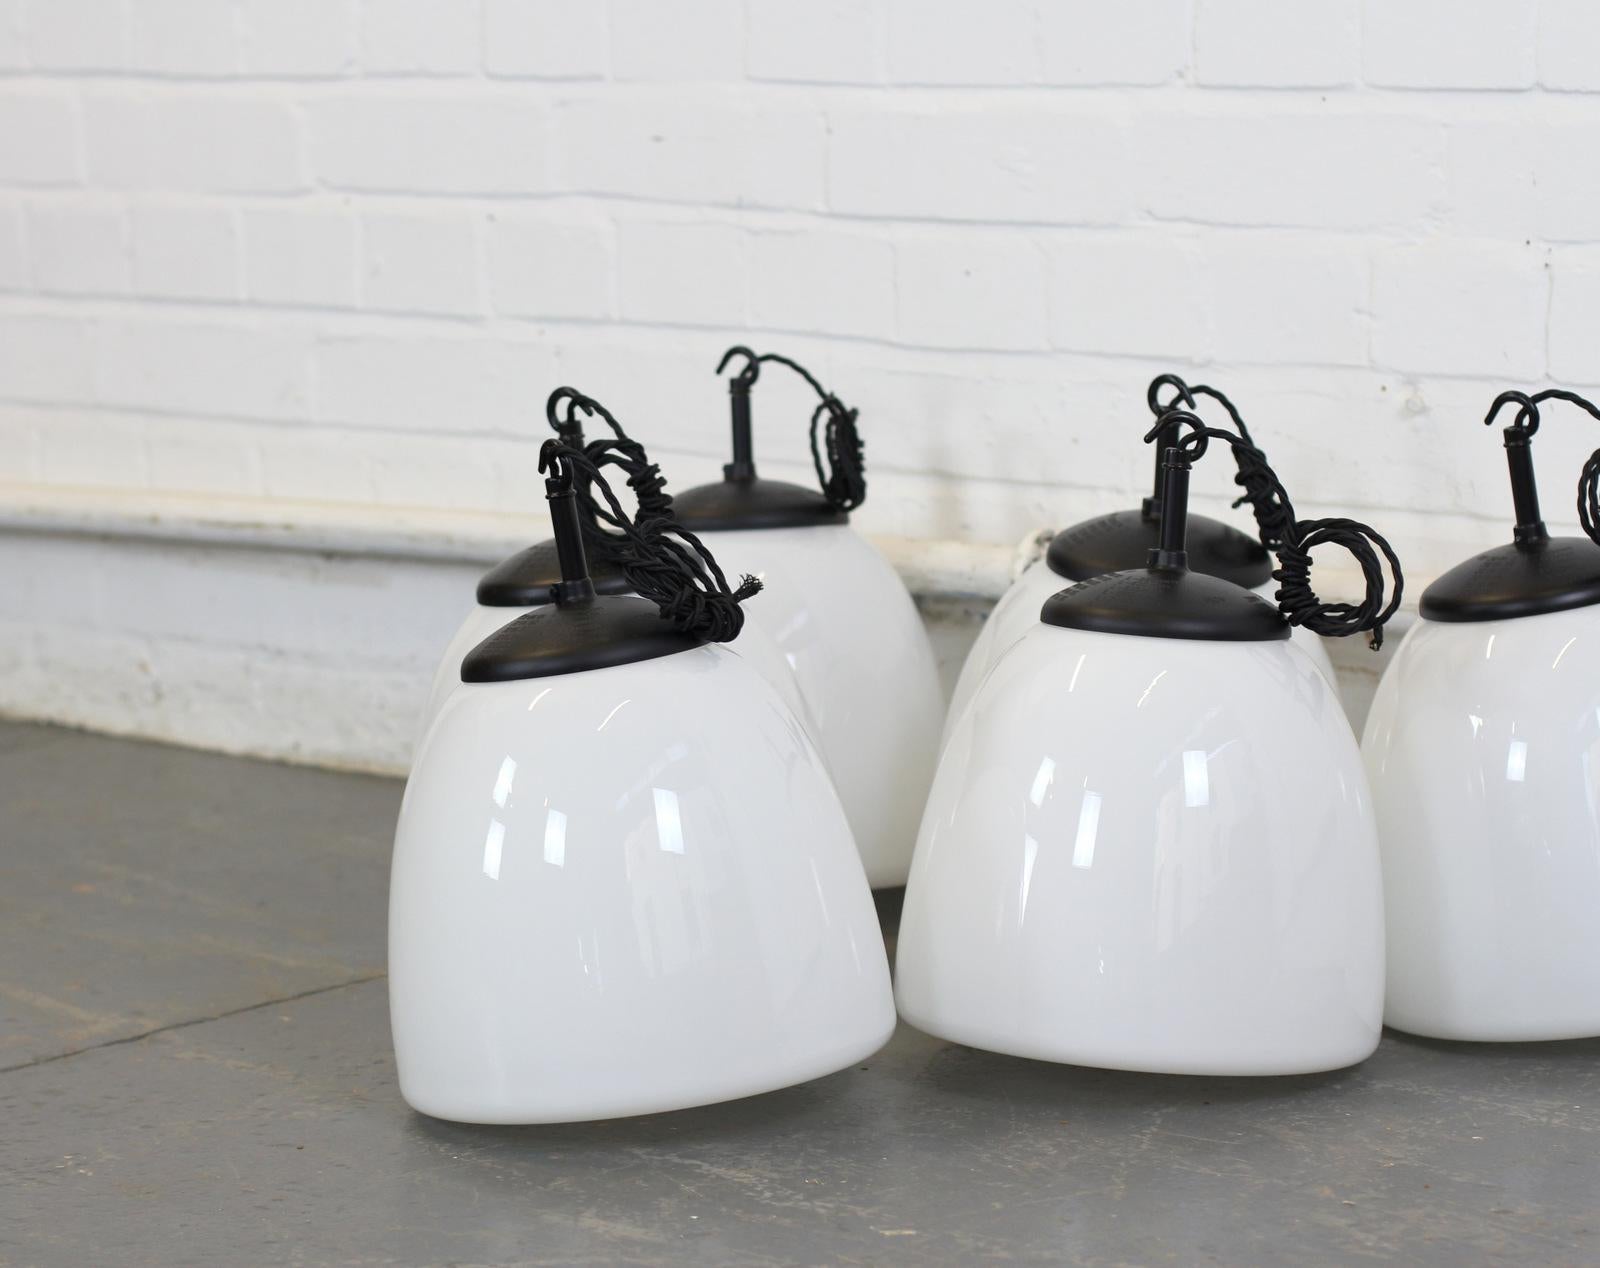 Czech opaline pendant lights, circa 1940s

- Price is per light (28 available)
- Black Bakelite tops
- Elegant shaped opaque glass
- Comes with 100cm of black twist cable and ceiling rose
- Takes E27 fitting bulbs
- Czech, circa 1940s
- 25cm